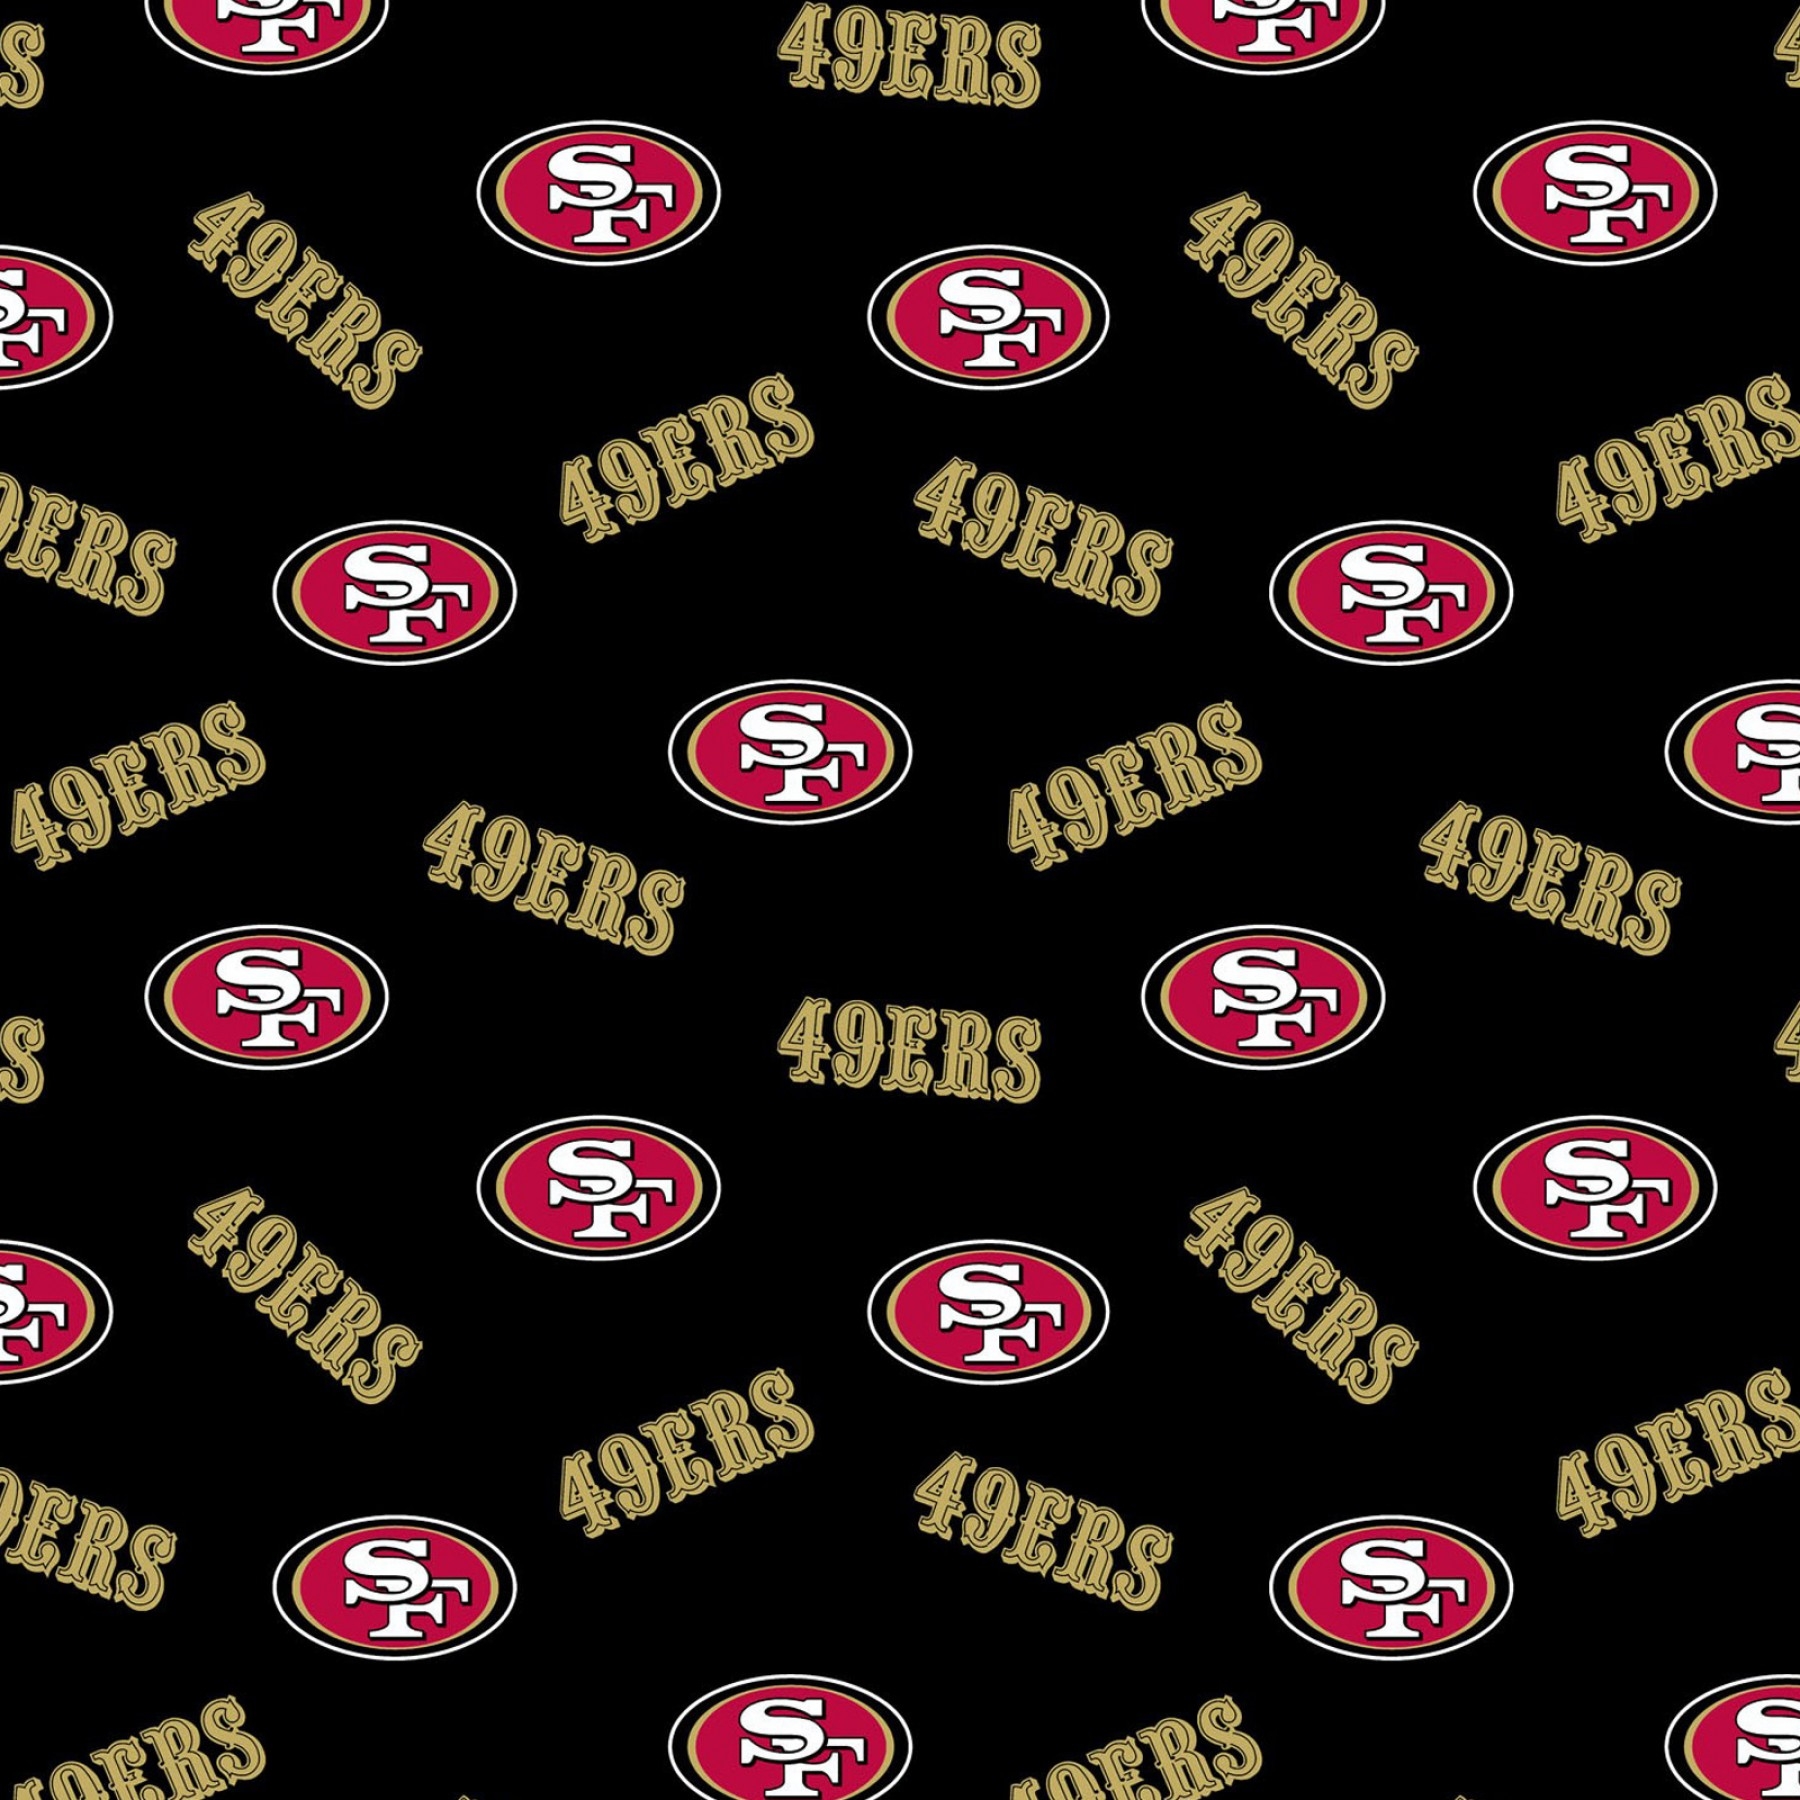 Style# NFL SANF-70406 Click Image to Zoom $13.95 Per Yard Style# NFL  SANF-70406 Qty In Stock: 0 Out of Stock Please call for backorder.